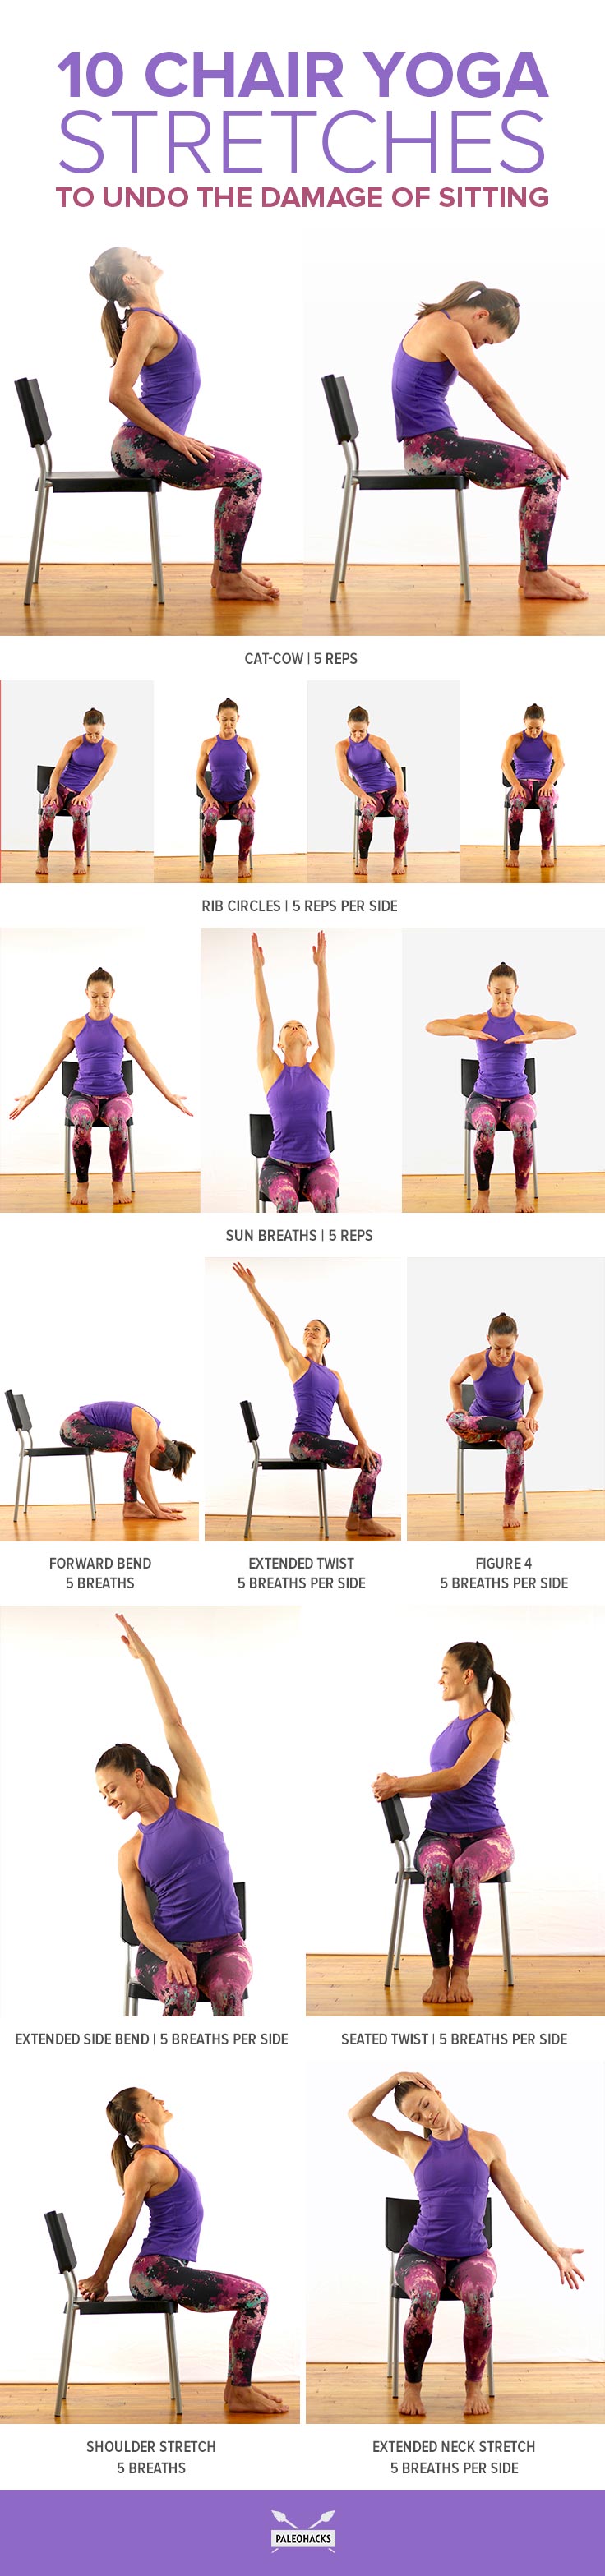 Does your body feel like it's getting tighter every time you sit? Use these pain-relieving yoga poses to release muscle tension from the comfort of your chair.